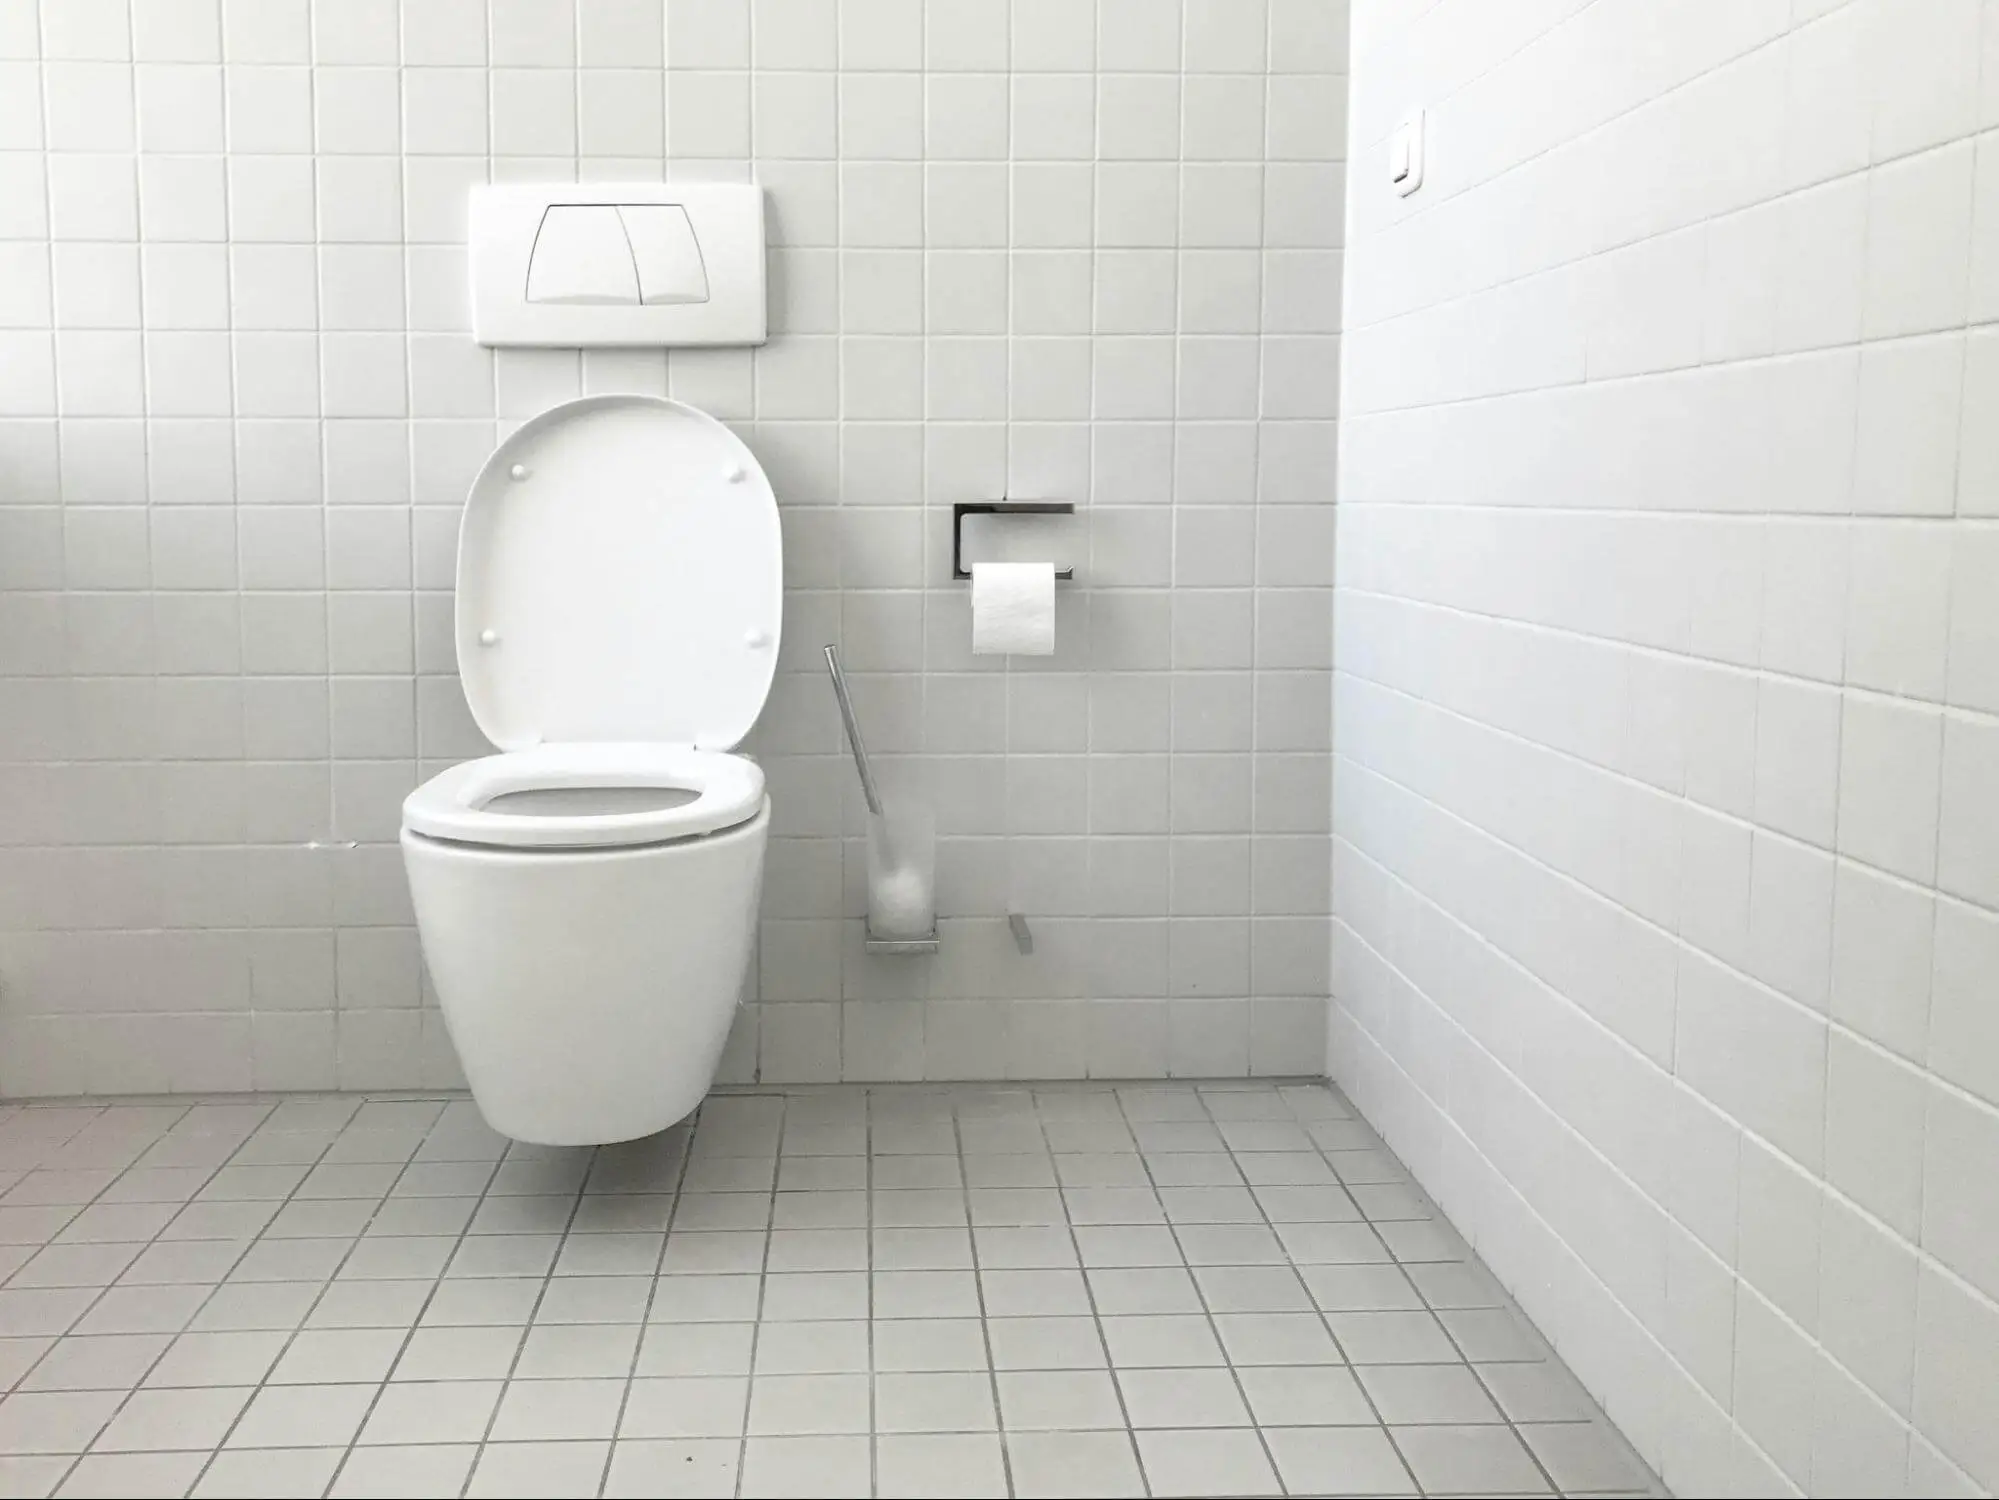 A white toilet in an all white tiled bathroom.